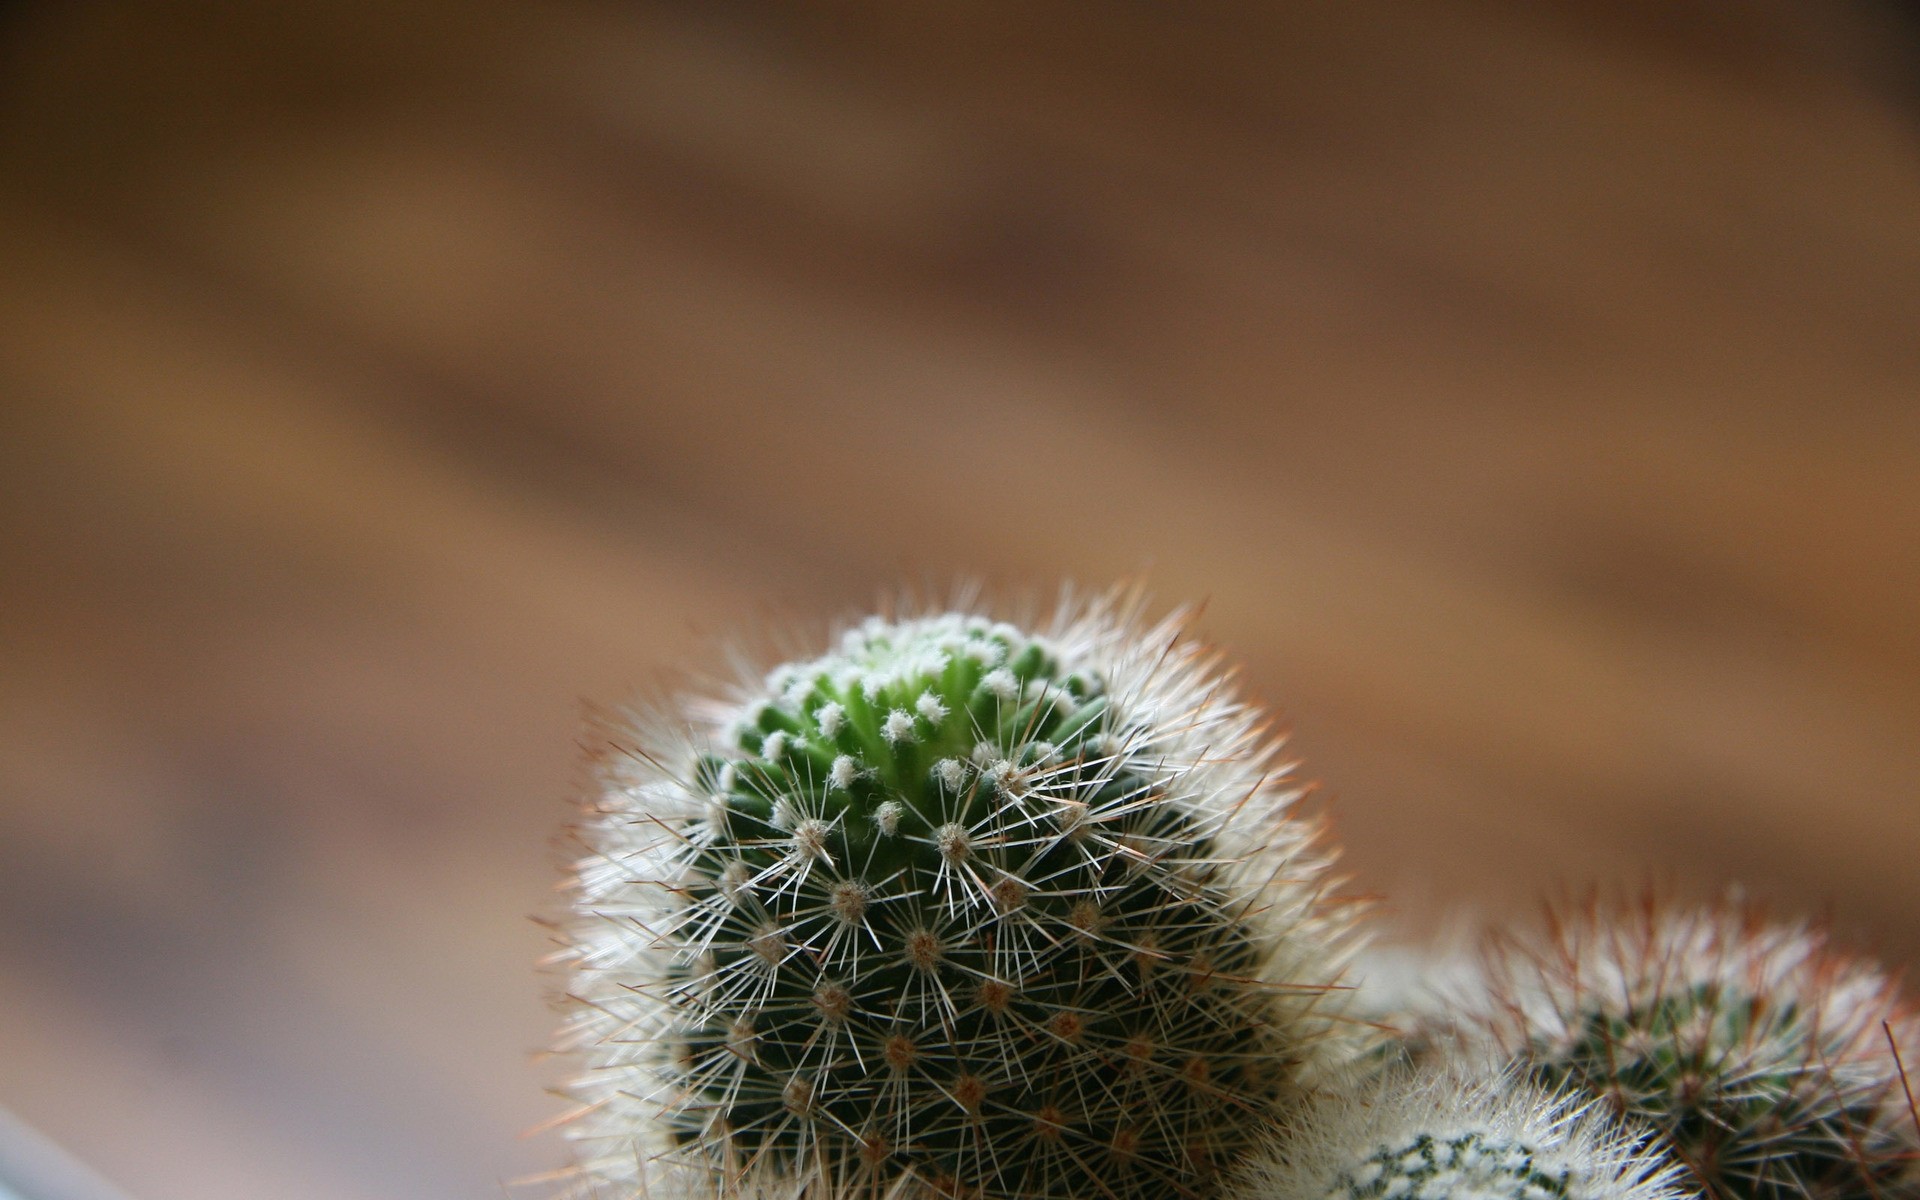 plants cactus nature desert sharp dry prickly flora spine growth flower leaf outdoors spike needle little